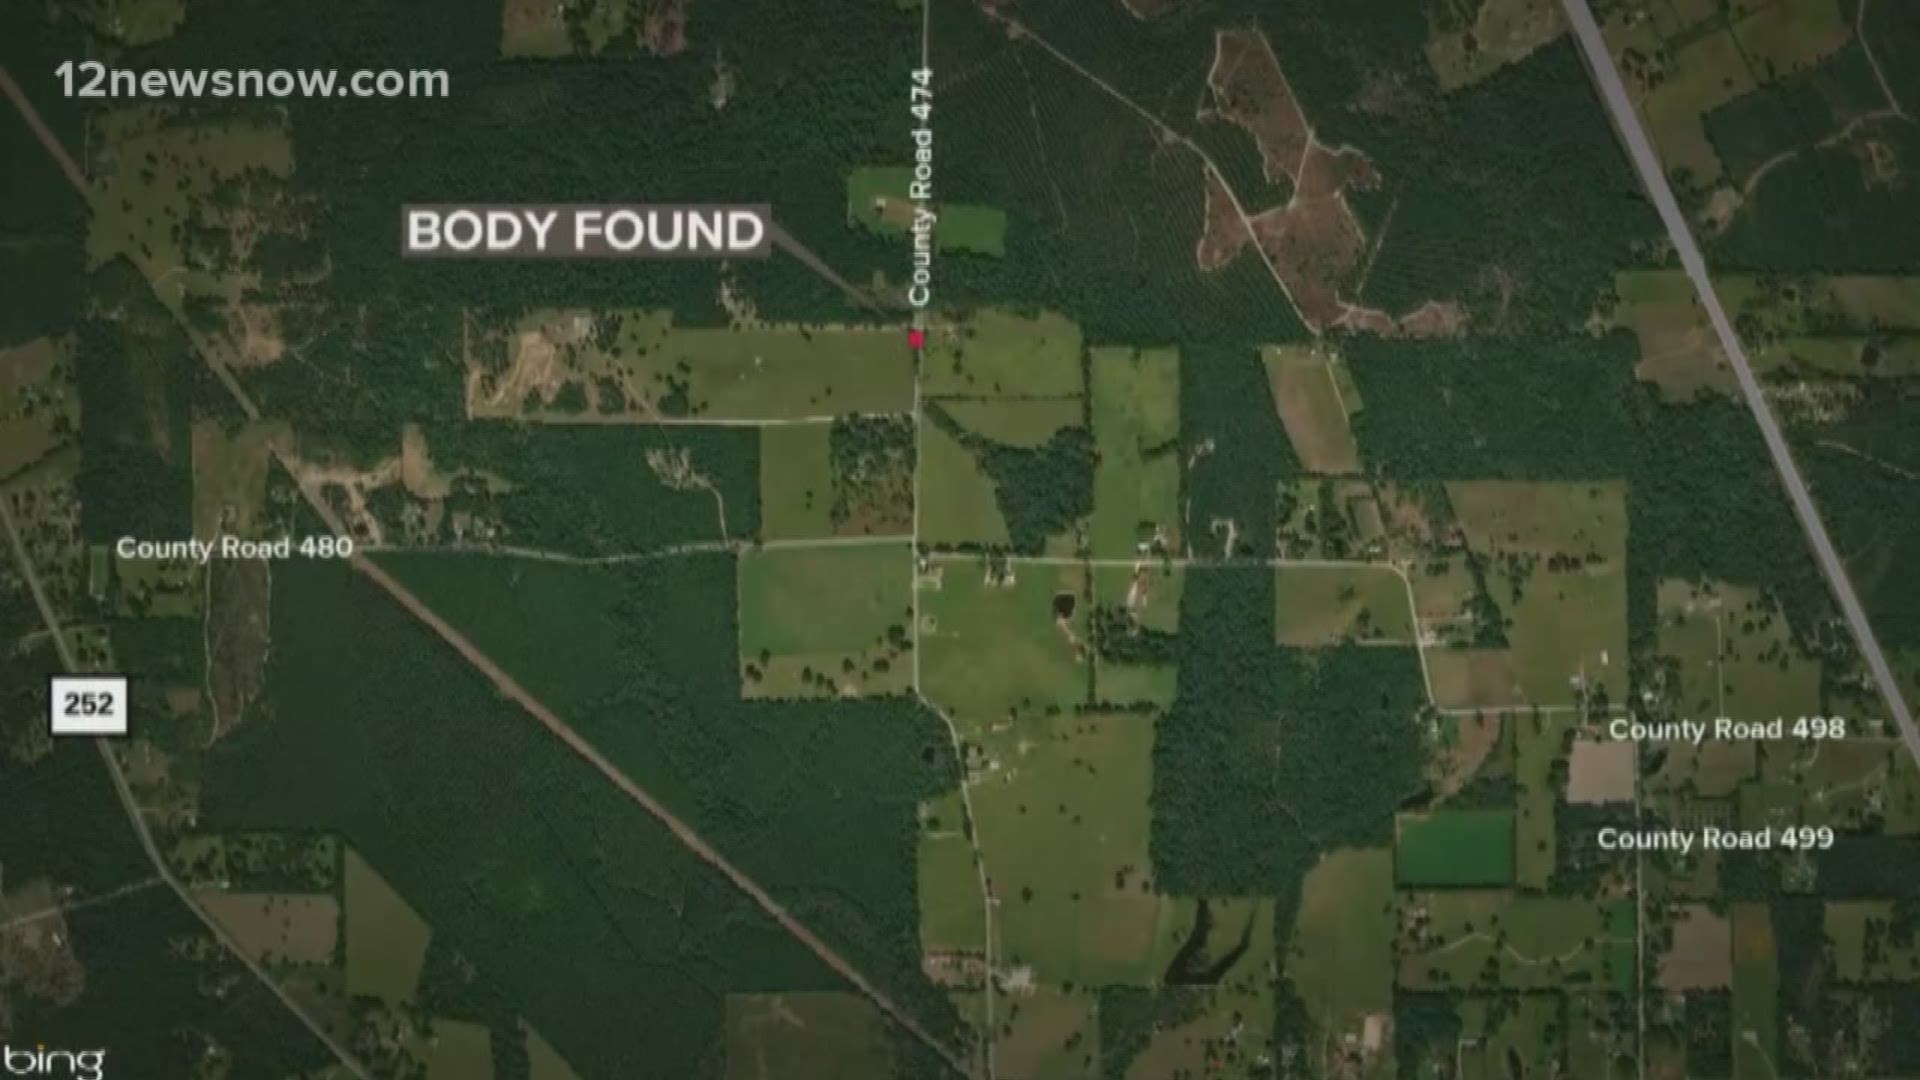 A young boy was found dead in a pond after he had been missing for hours. The Jasper County Sheriff’s deputies were told a 3-year-old boy in Kirbyville went missing.